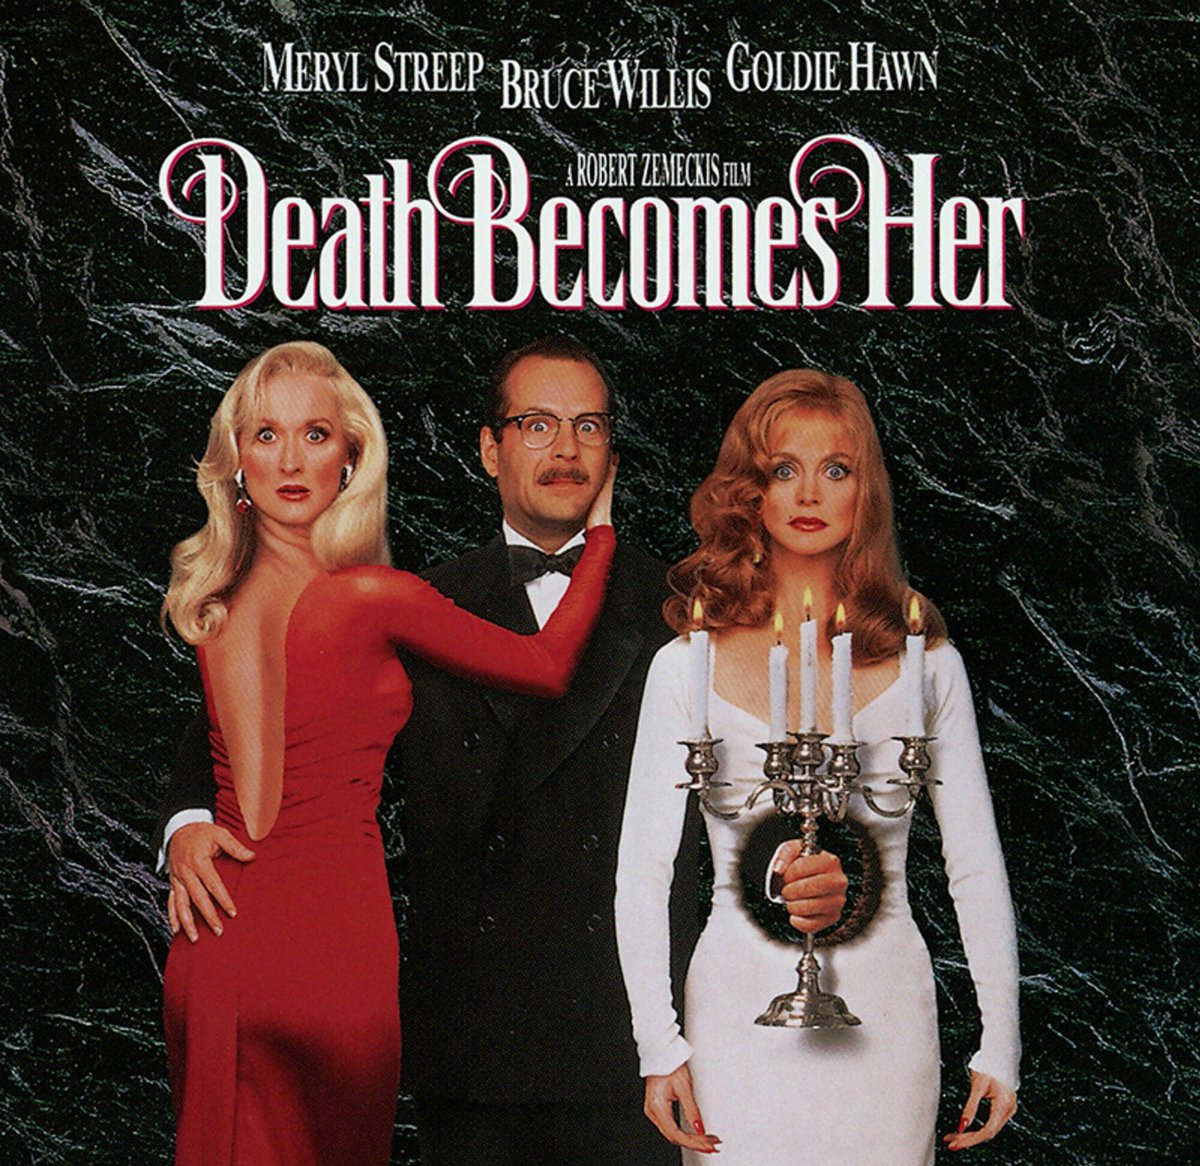 Jessica Chastain wants to star in a remake of ‘Death Becomes Her’ with Anne Hathaway. “I was just talking to Annie [Hathaway] about this! It would be so fun to remake [it]. I’ll do either the Meryl Streep or Goldie Hawn role. I think it’s a masterpiece.” parade.com/celebrities/je…